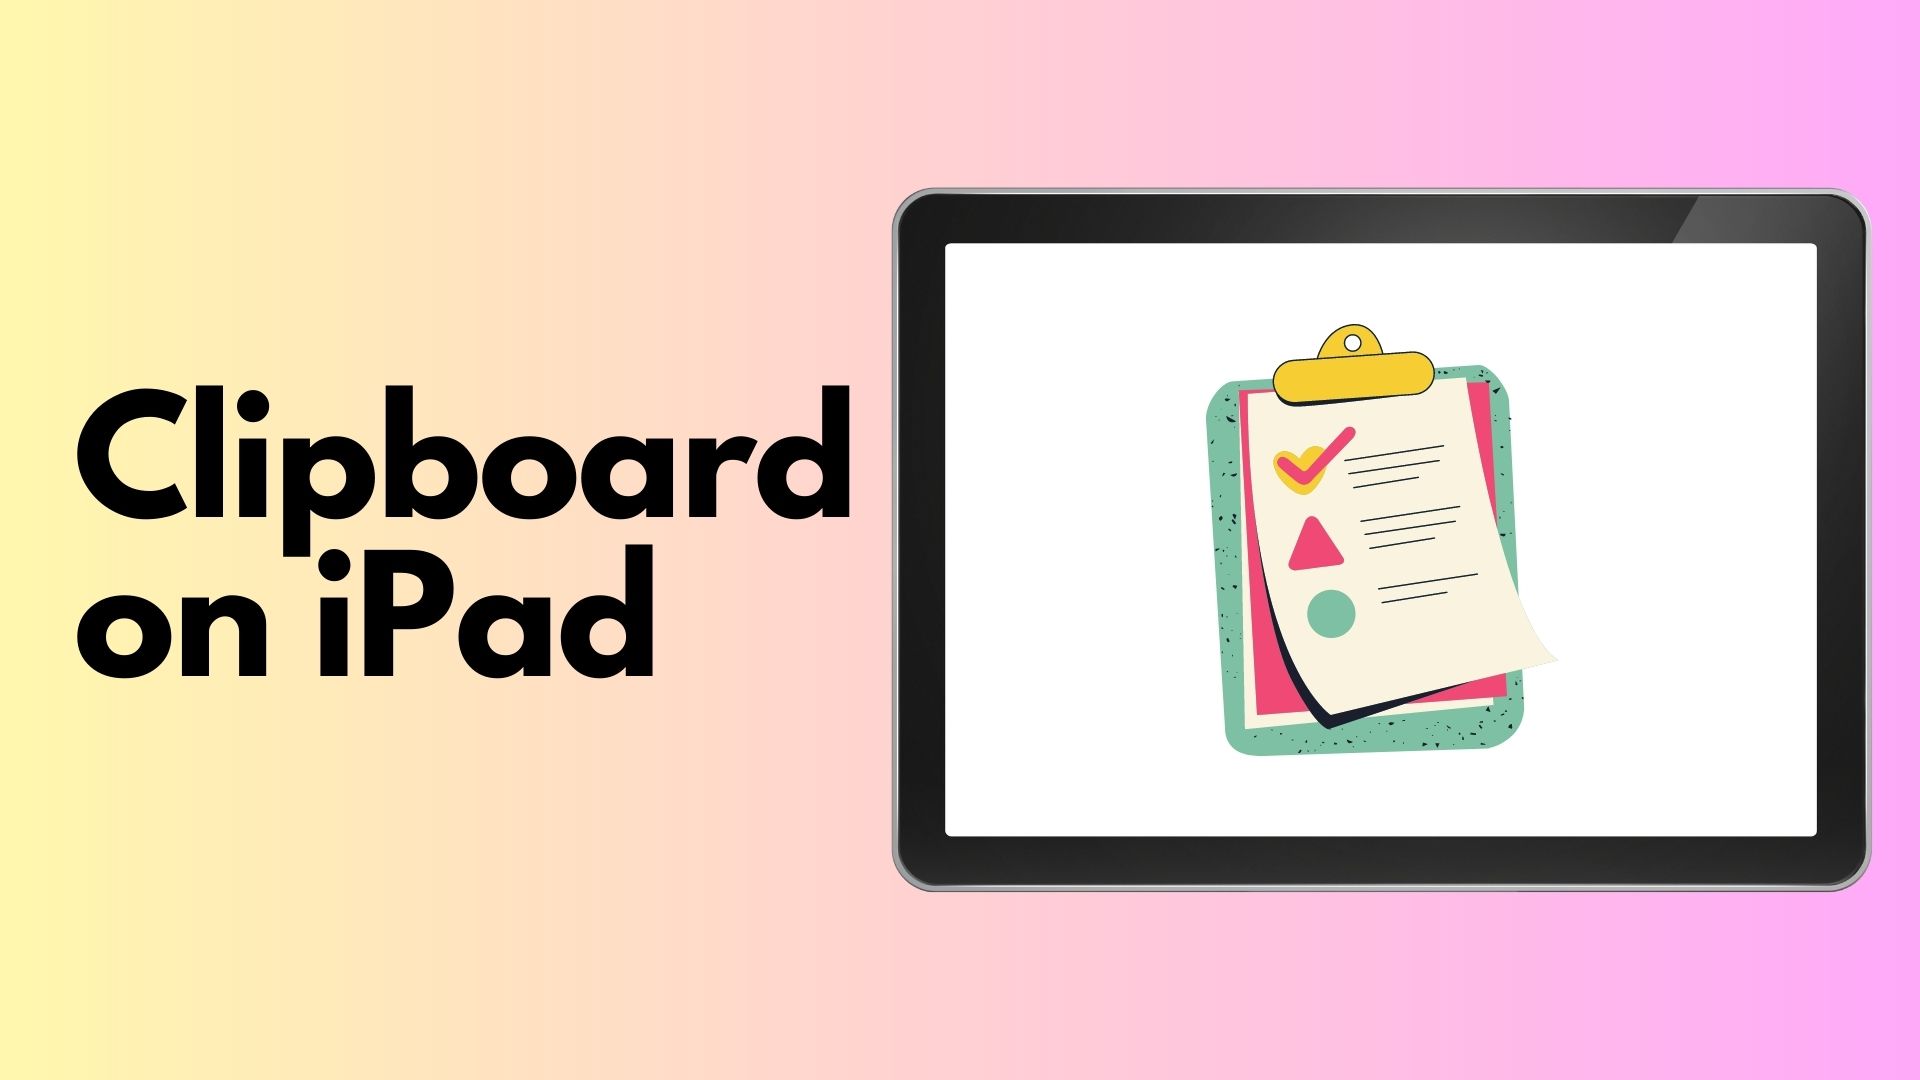 Where is the Clipboard on iPads?